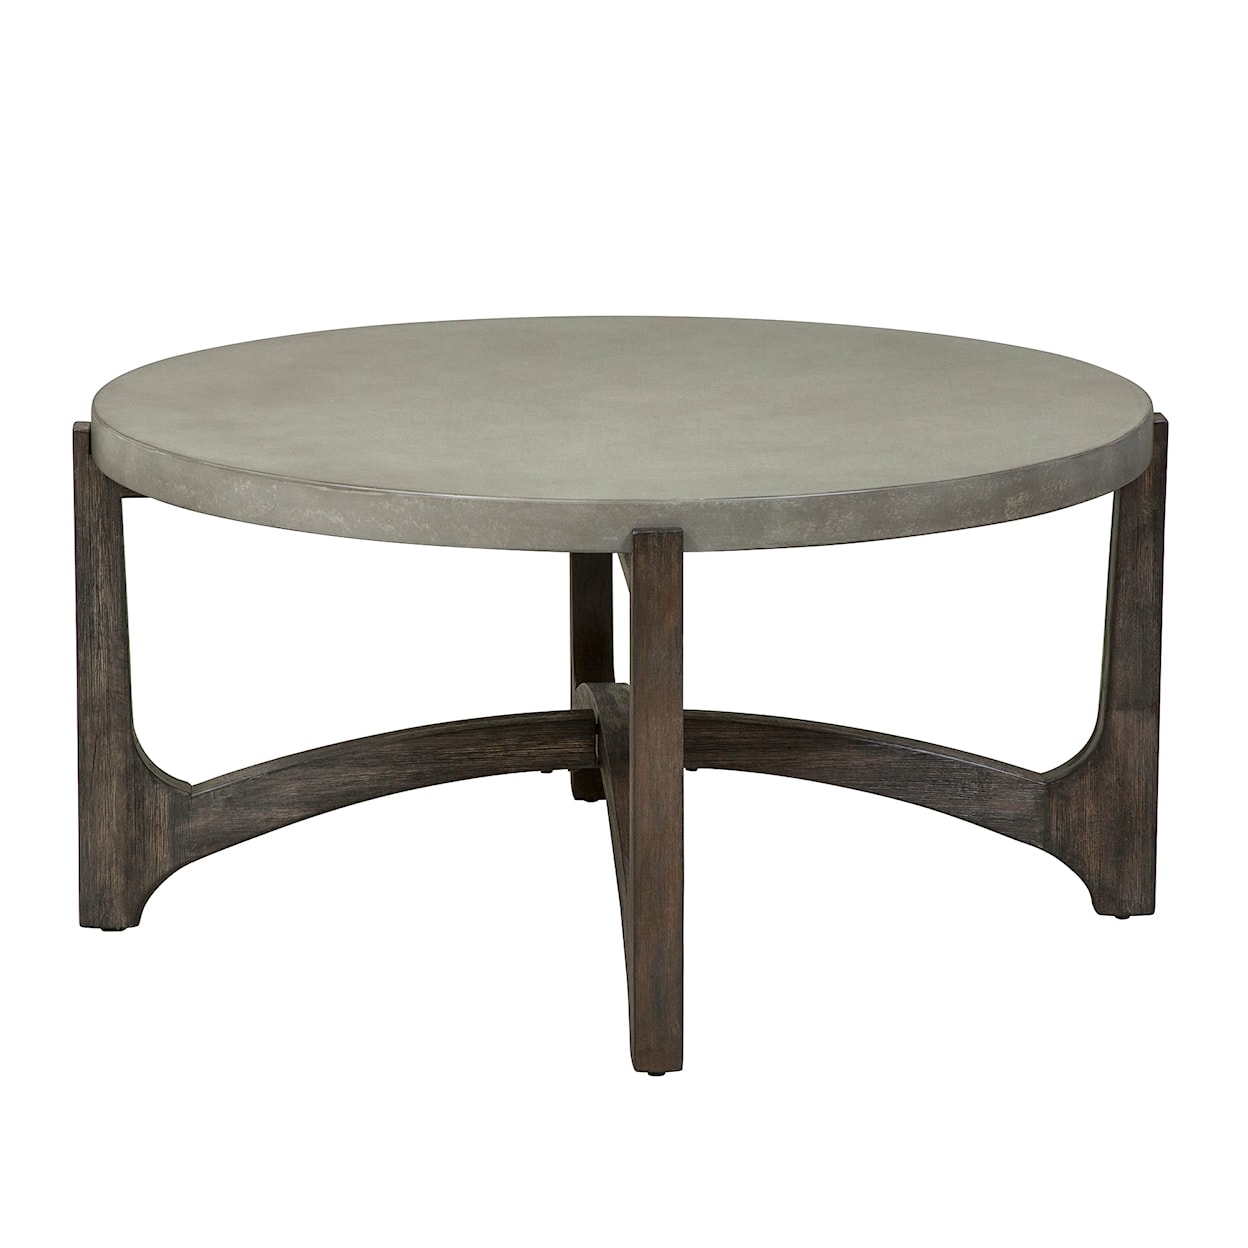 Libby Cato Round Cocktail Table